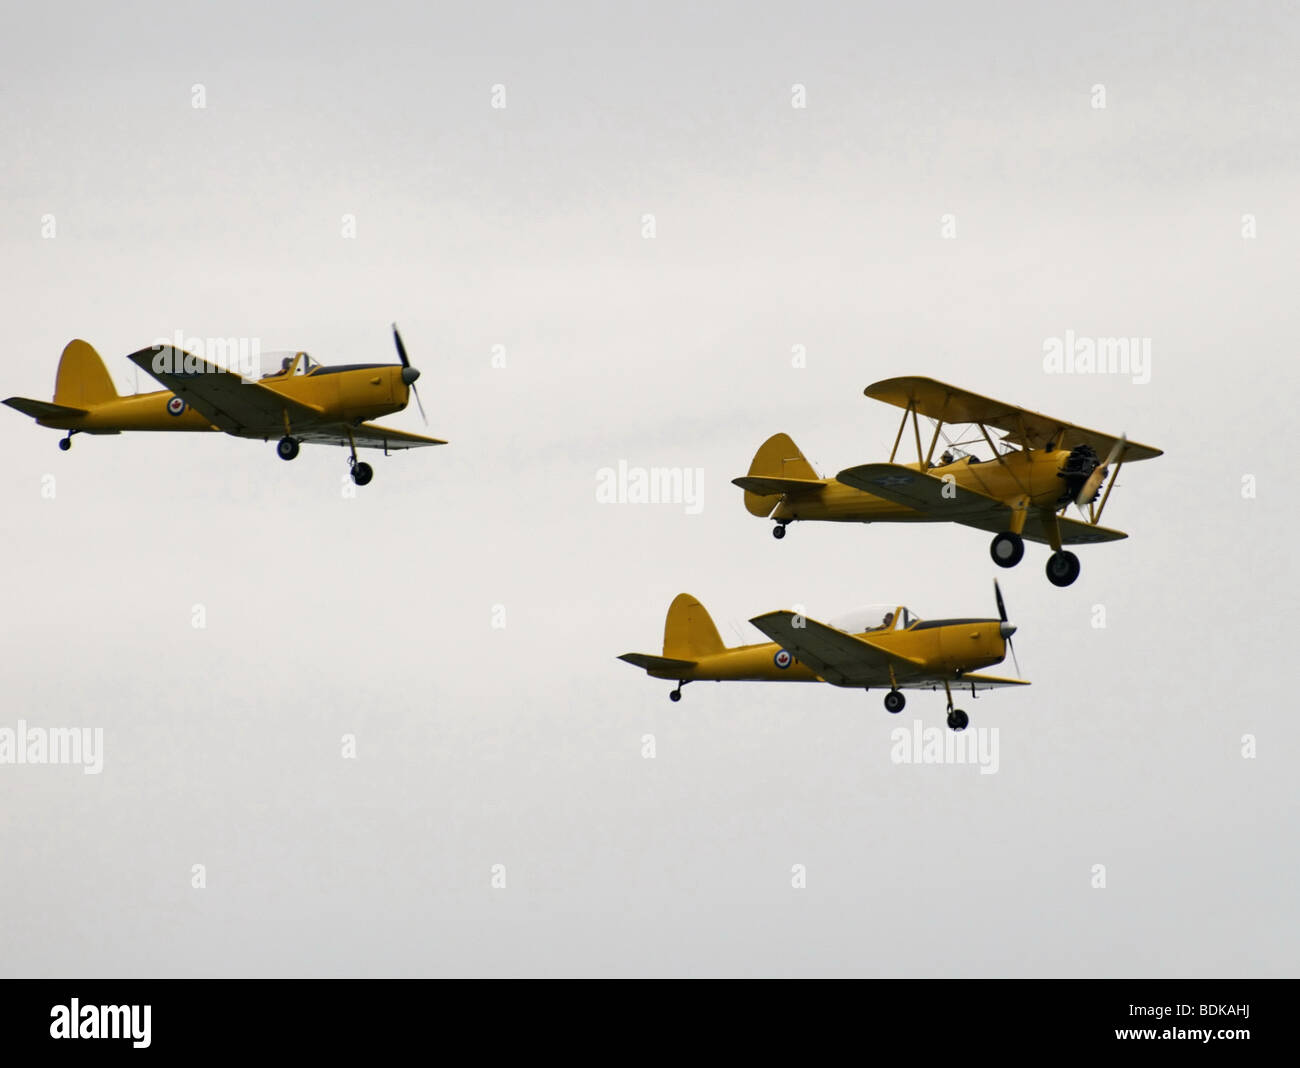 Flying chipmunks vintage planes are flying in formation  in an overcast sky. Stock Photo